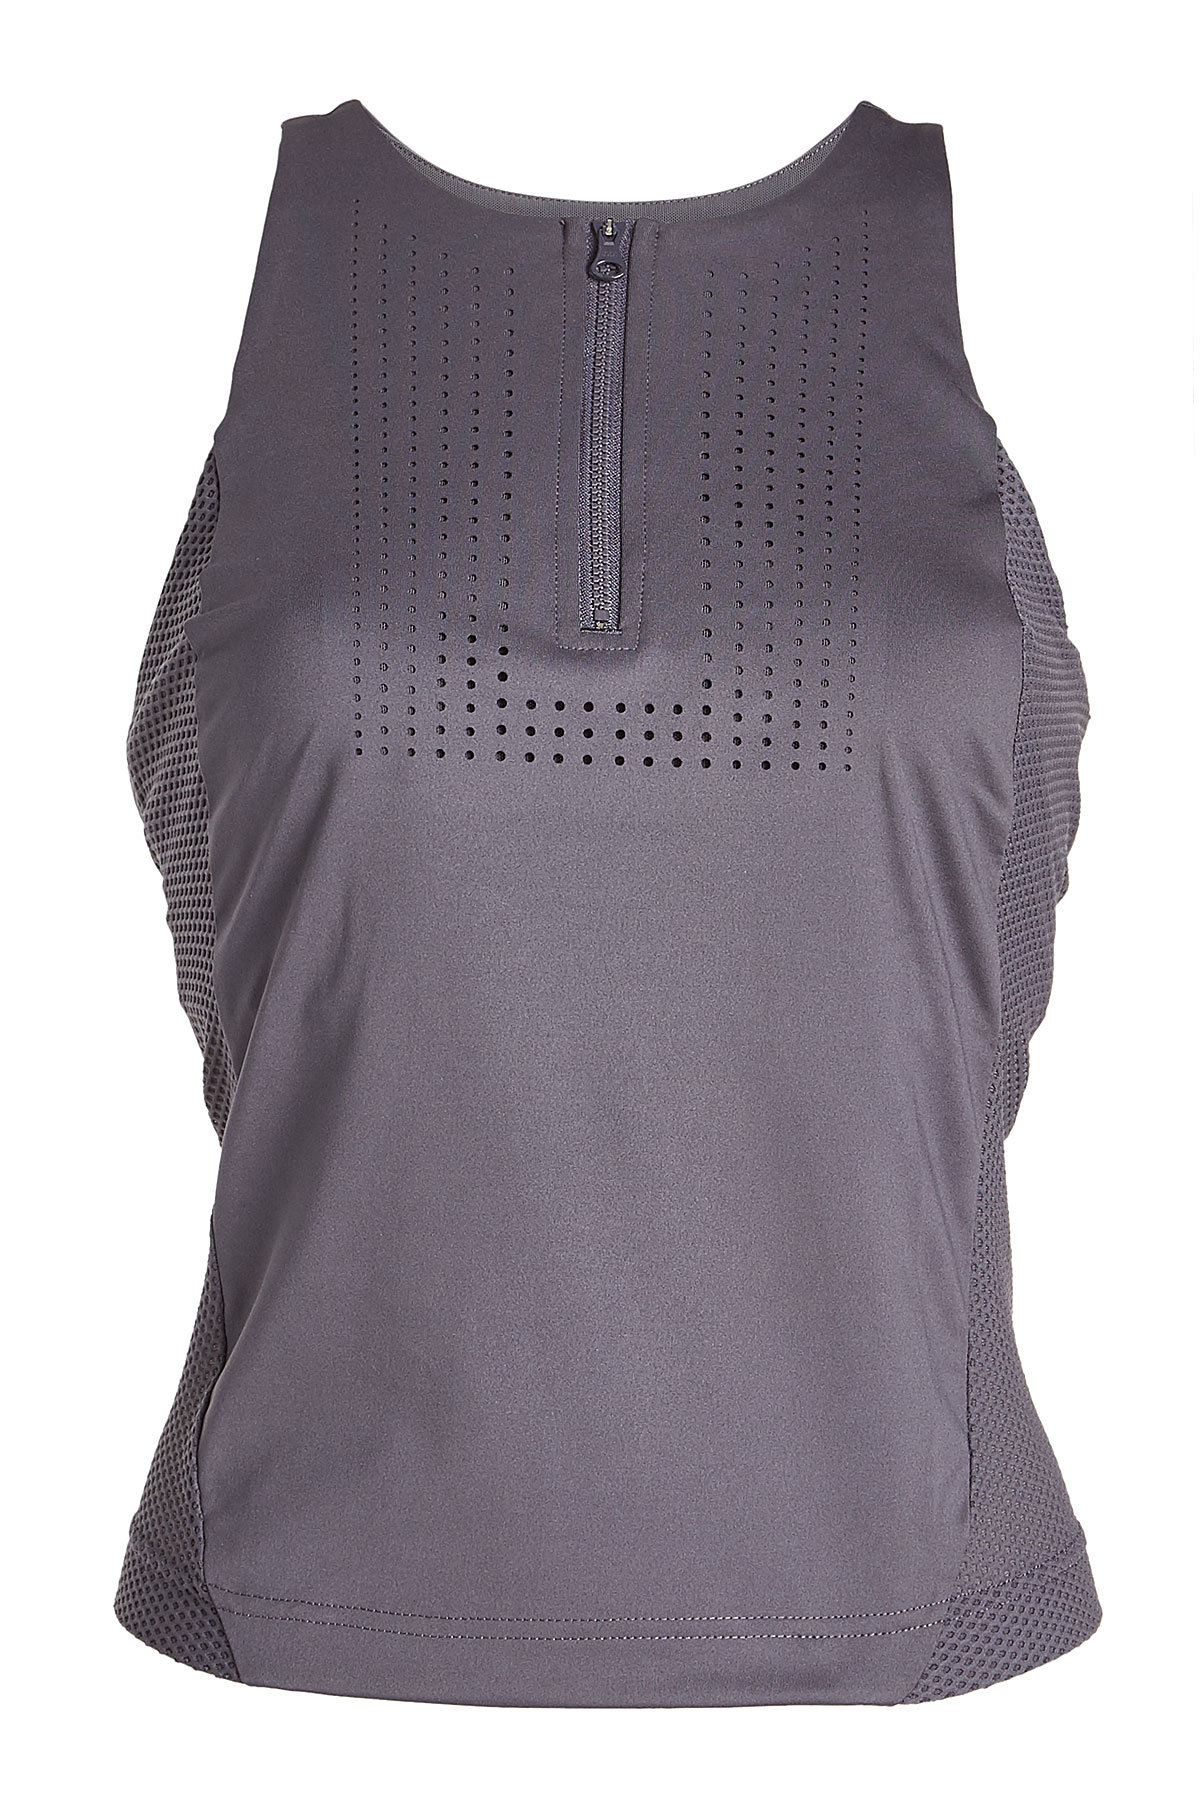 Running Excel Tank Top by adidas by Stella McCartney